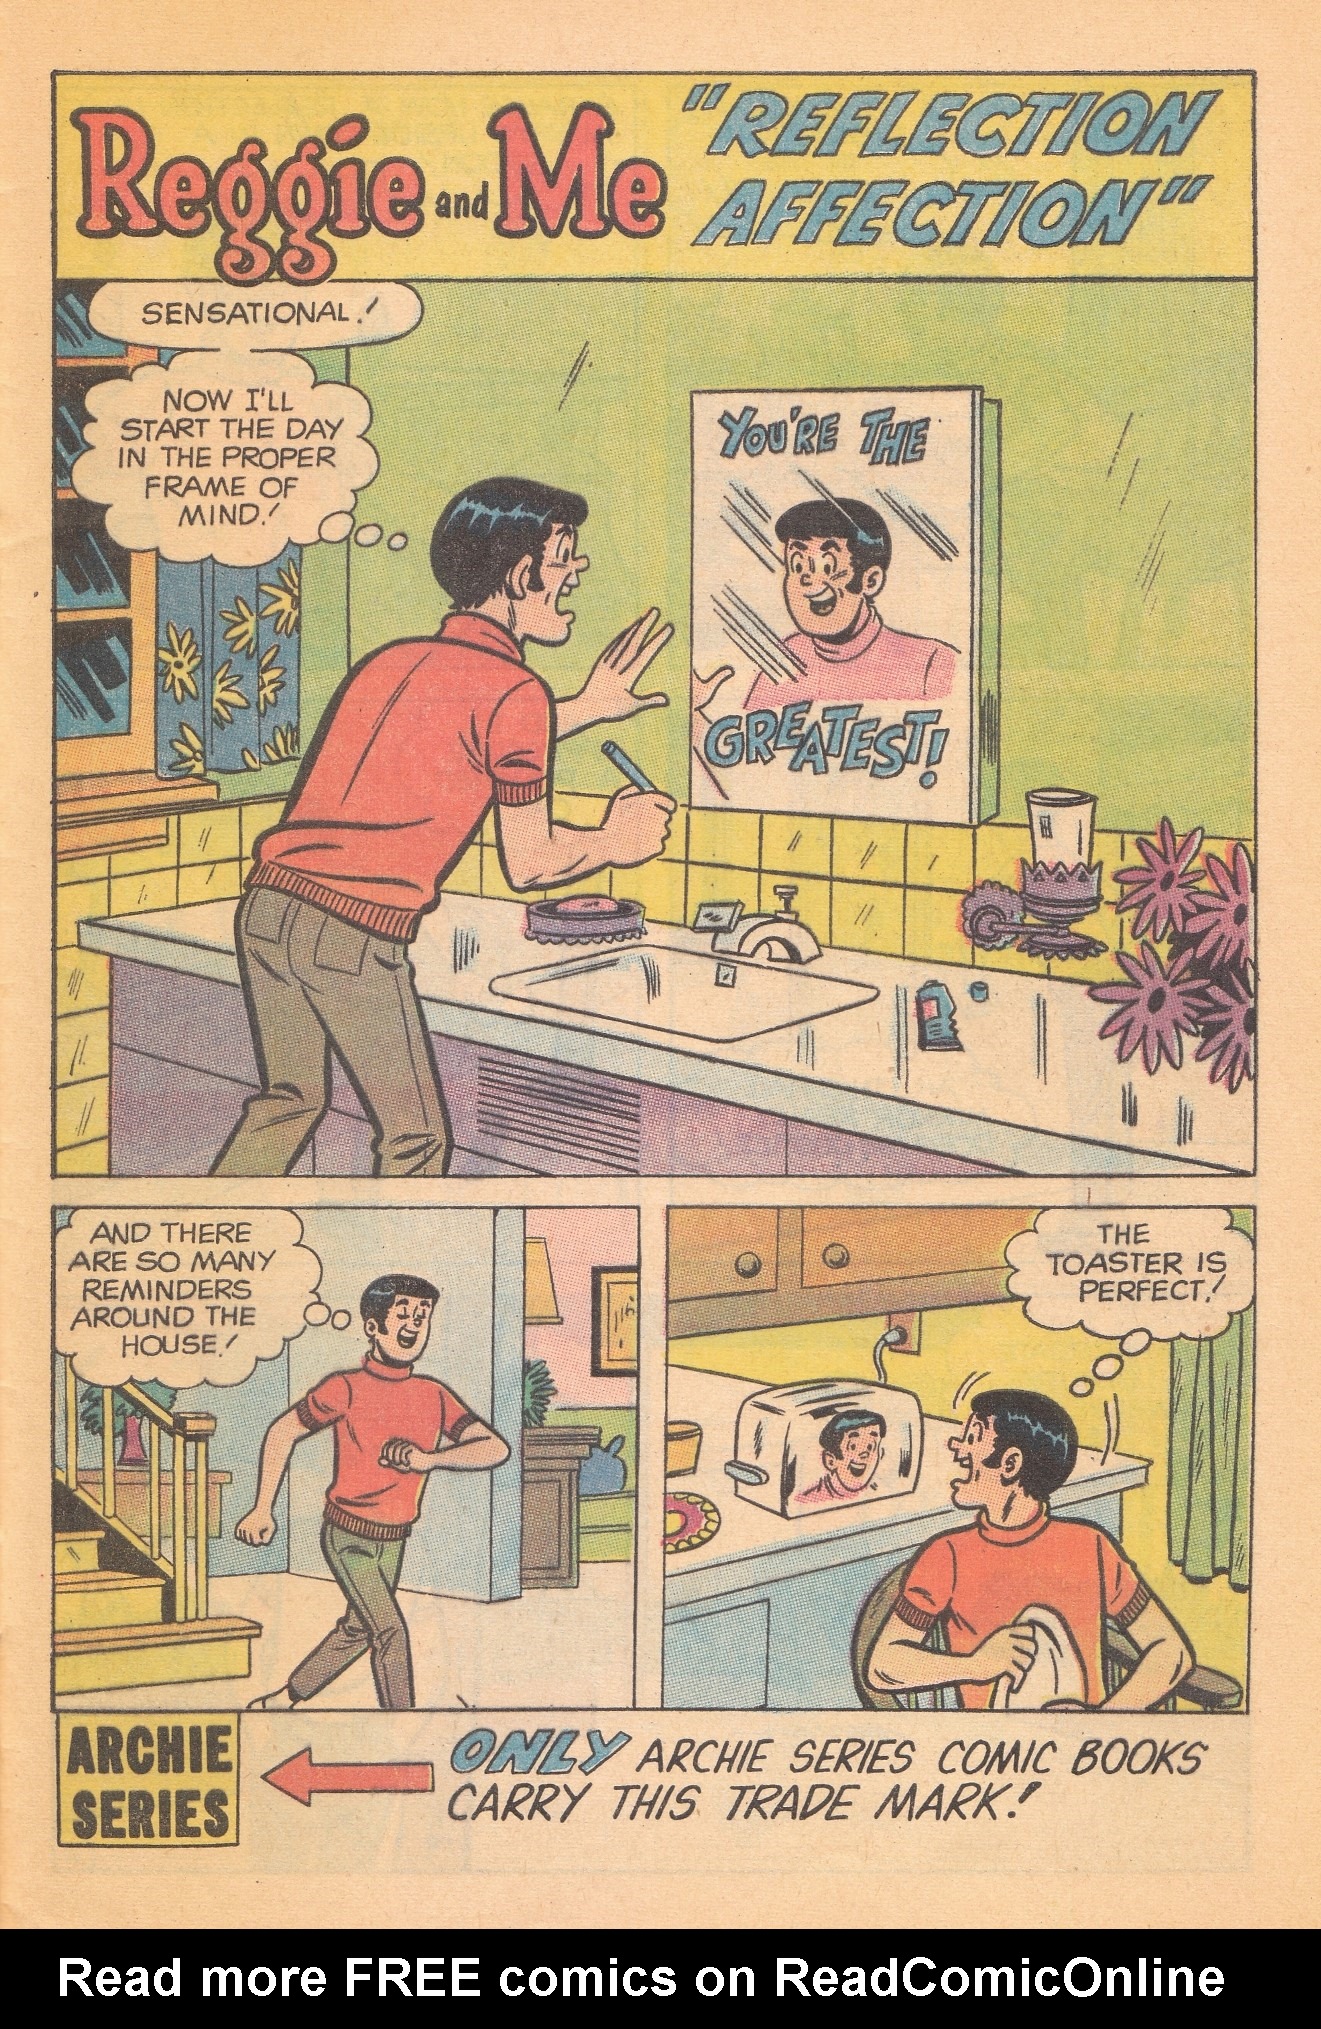 Read online Reggie and Me (1966) comic -  Issue #38 - 29